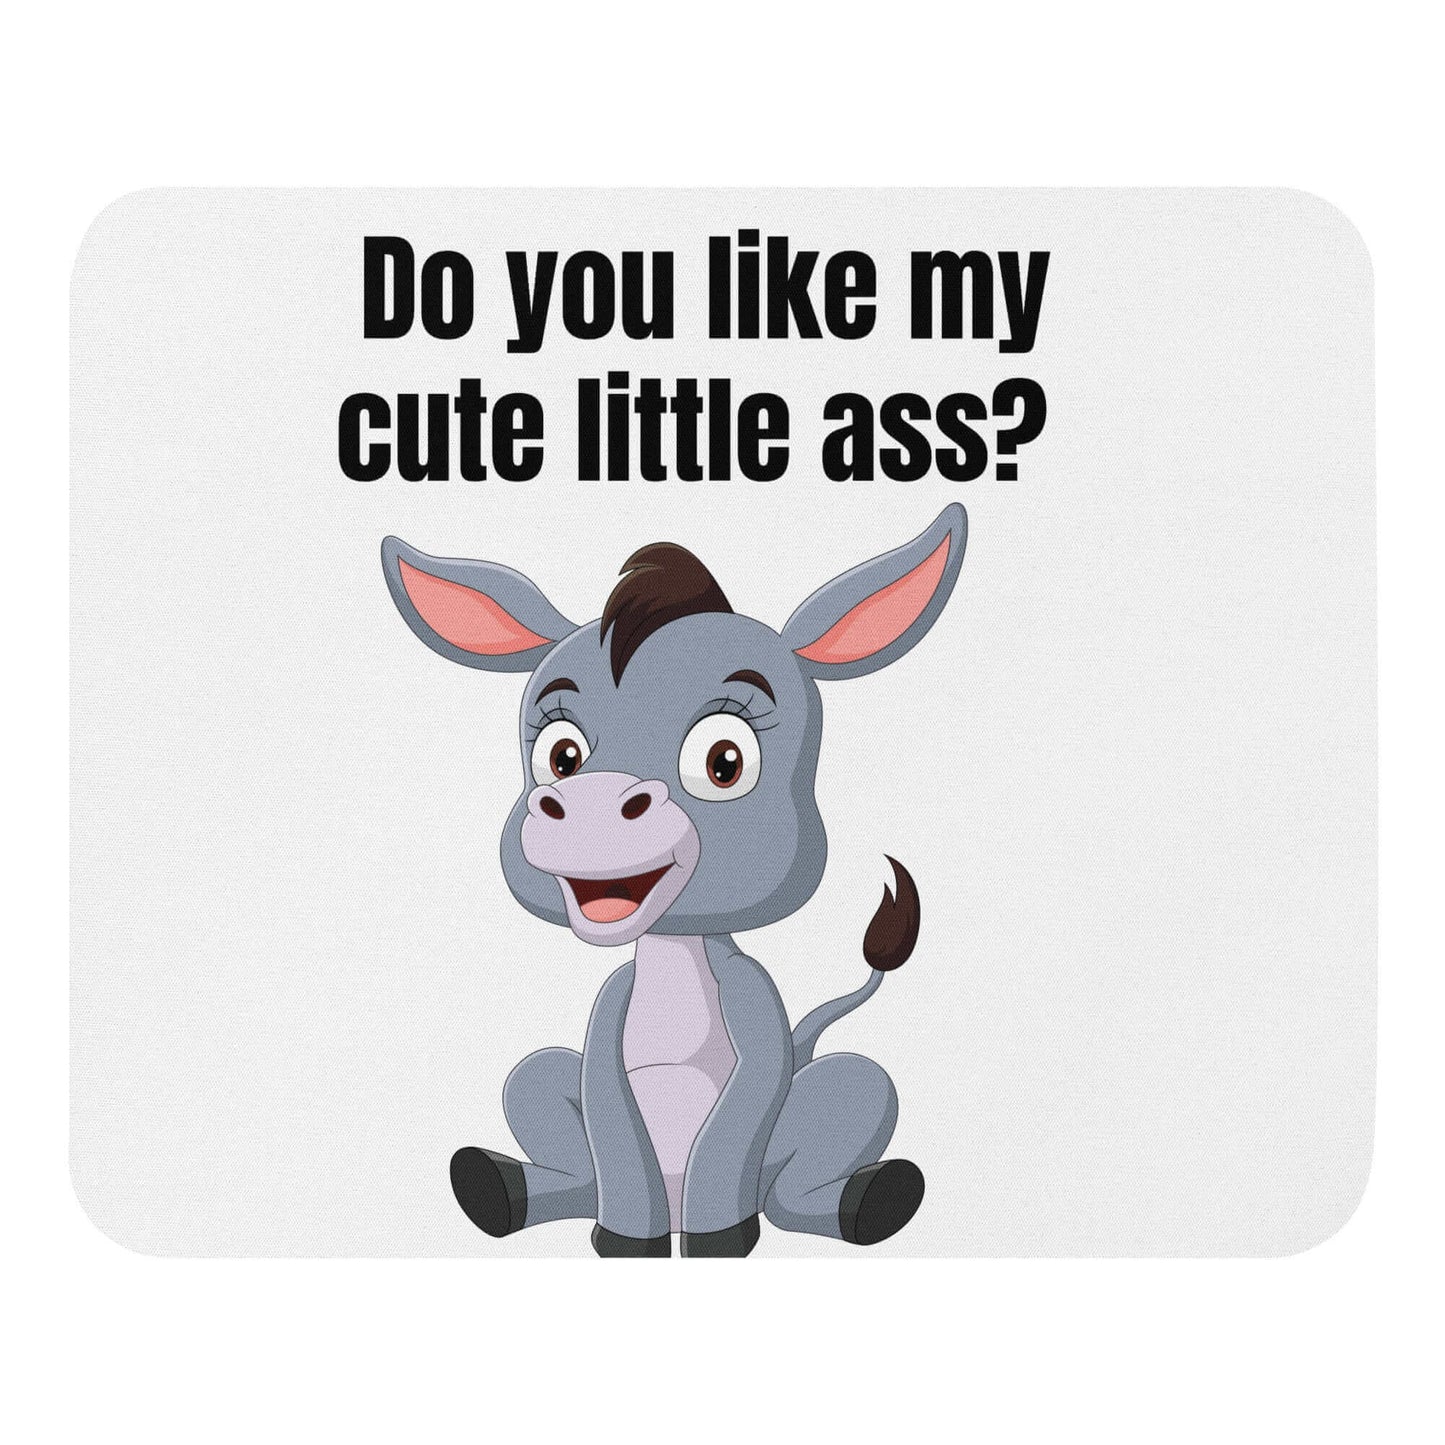 Do you like my cute little ass? - Mouse pad ass cute donkey funny gift for her gift for mom gift for wife little donkey